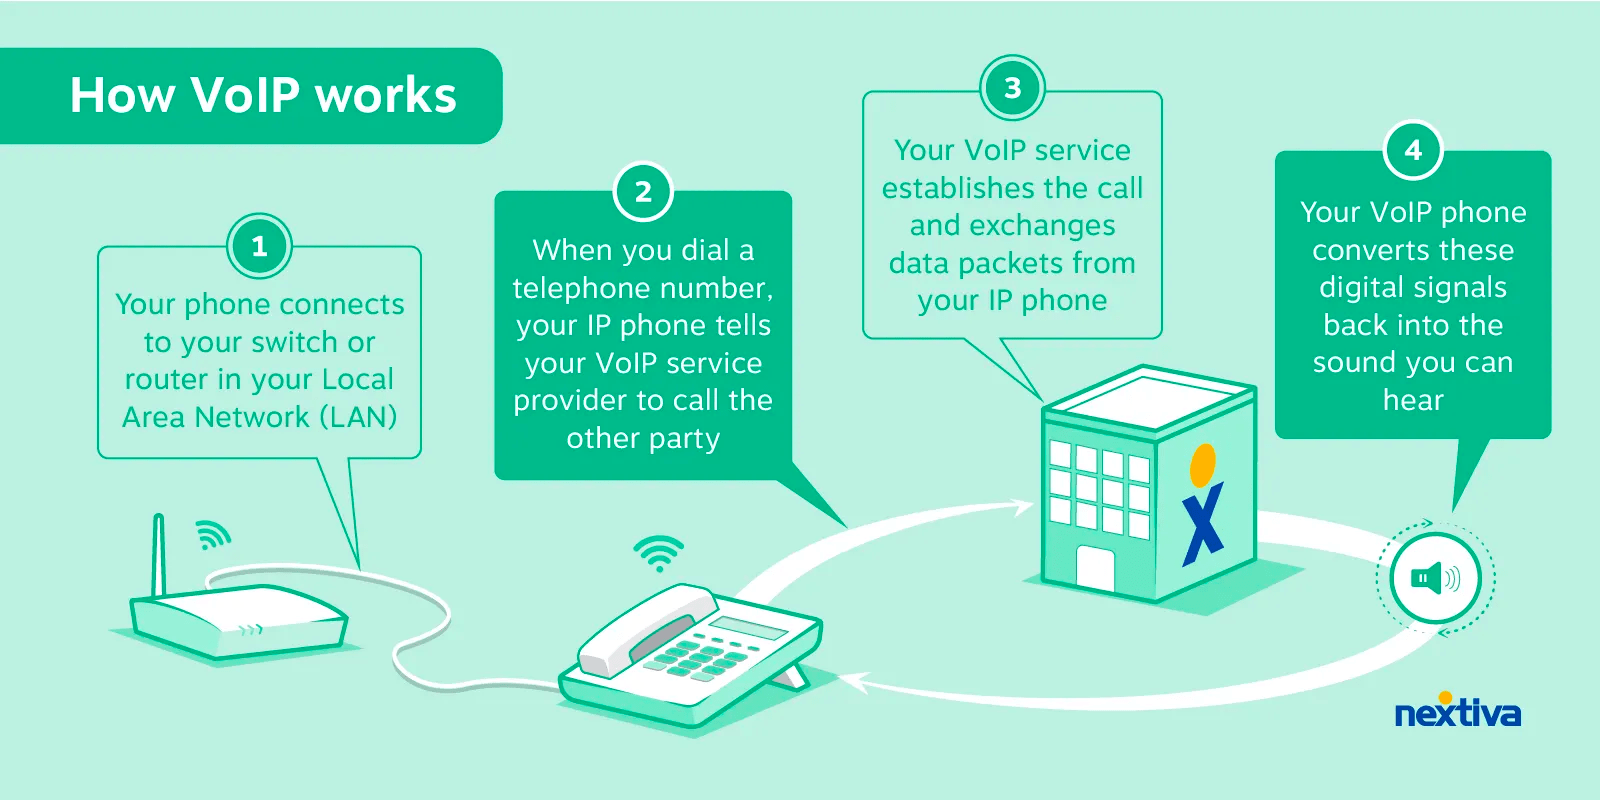 A picture showing how VoIP works